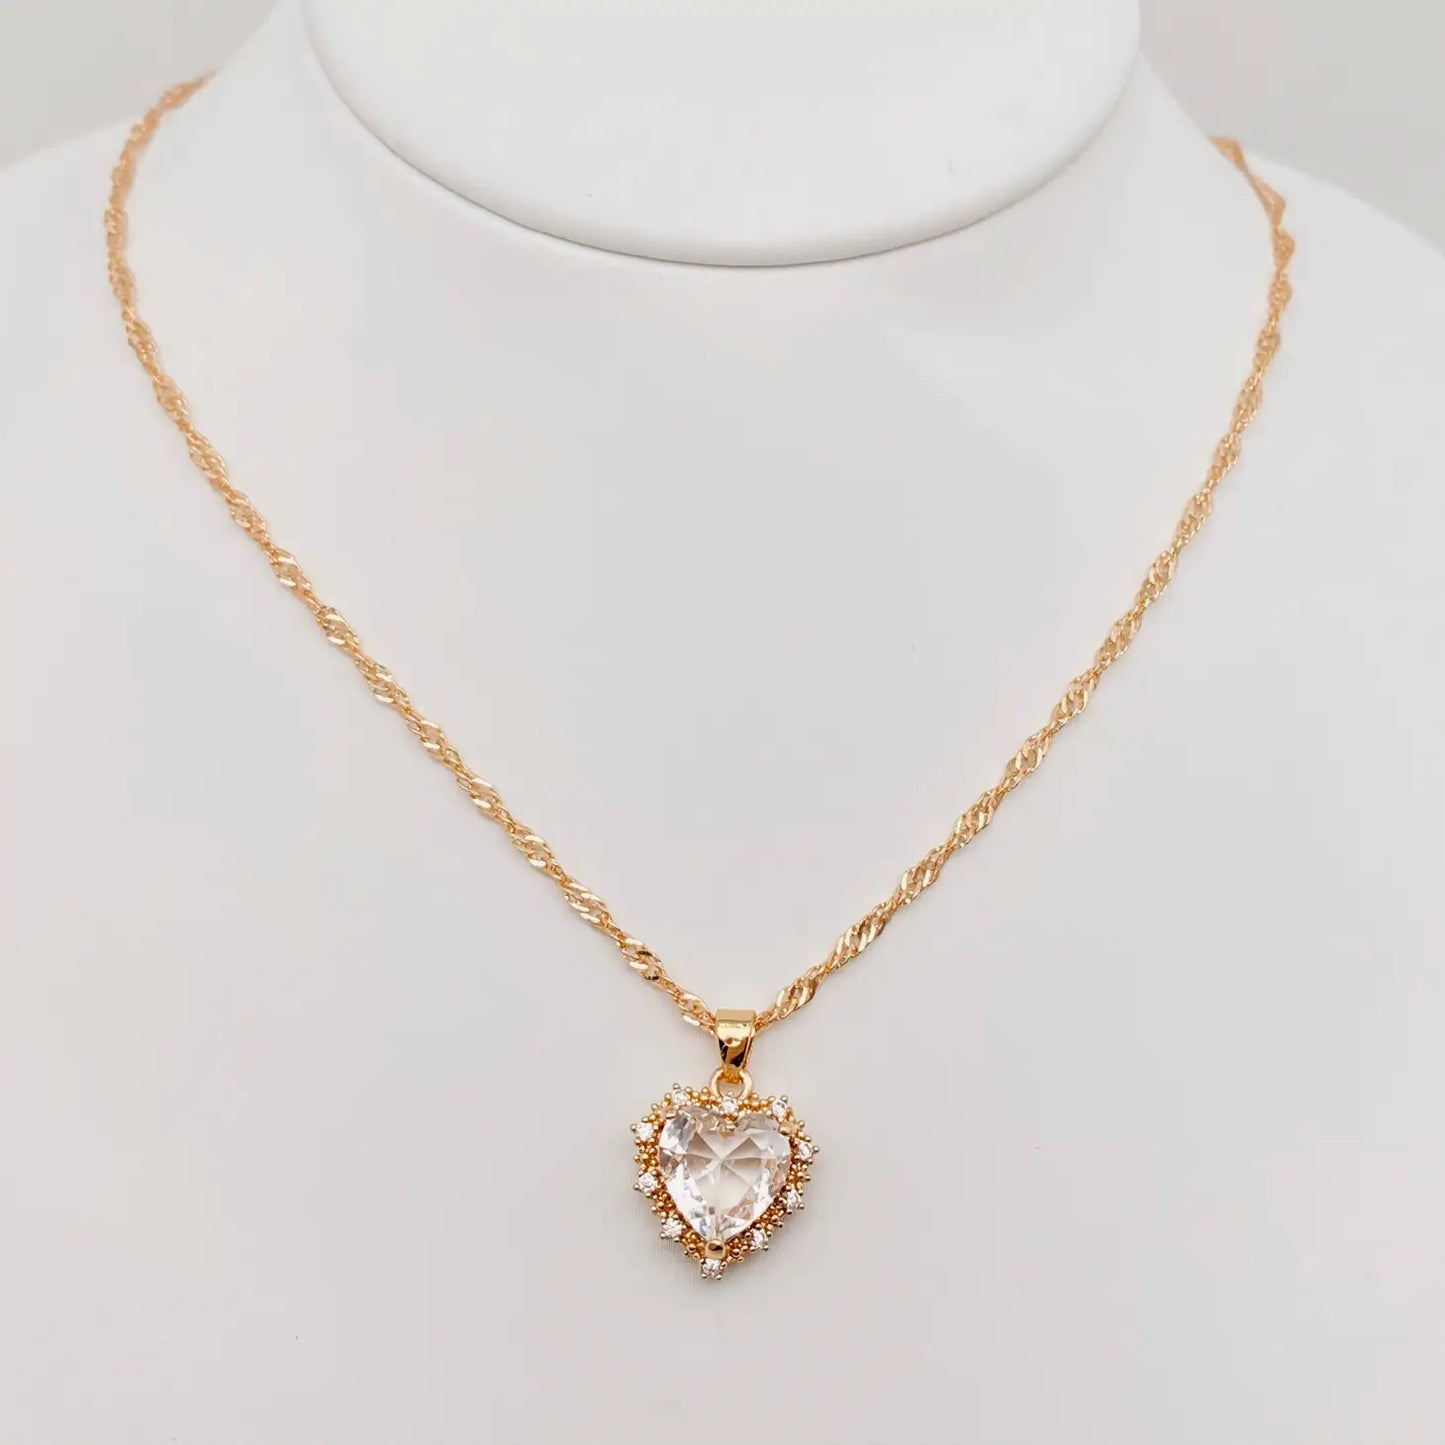 Heart-shaped Pendant Necklace